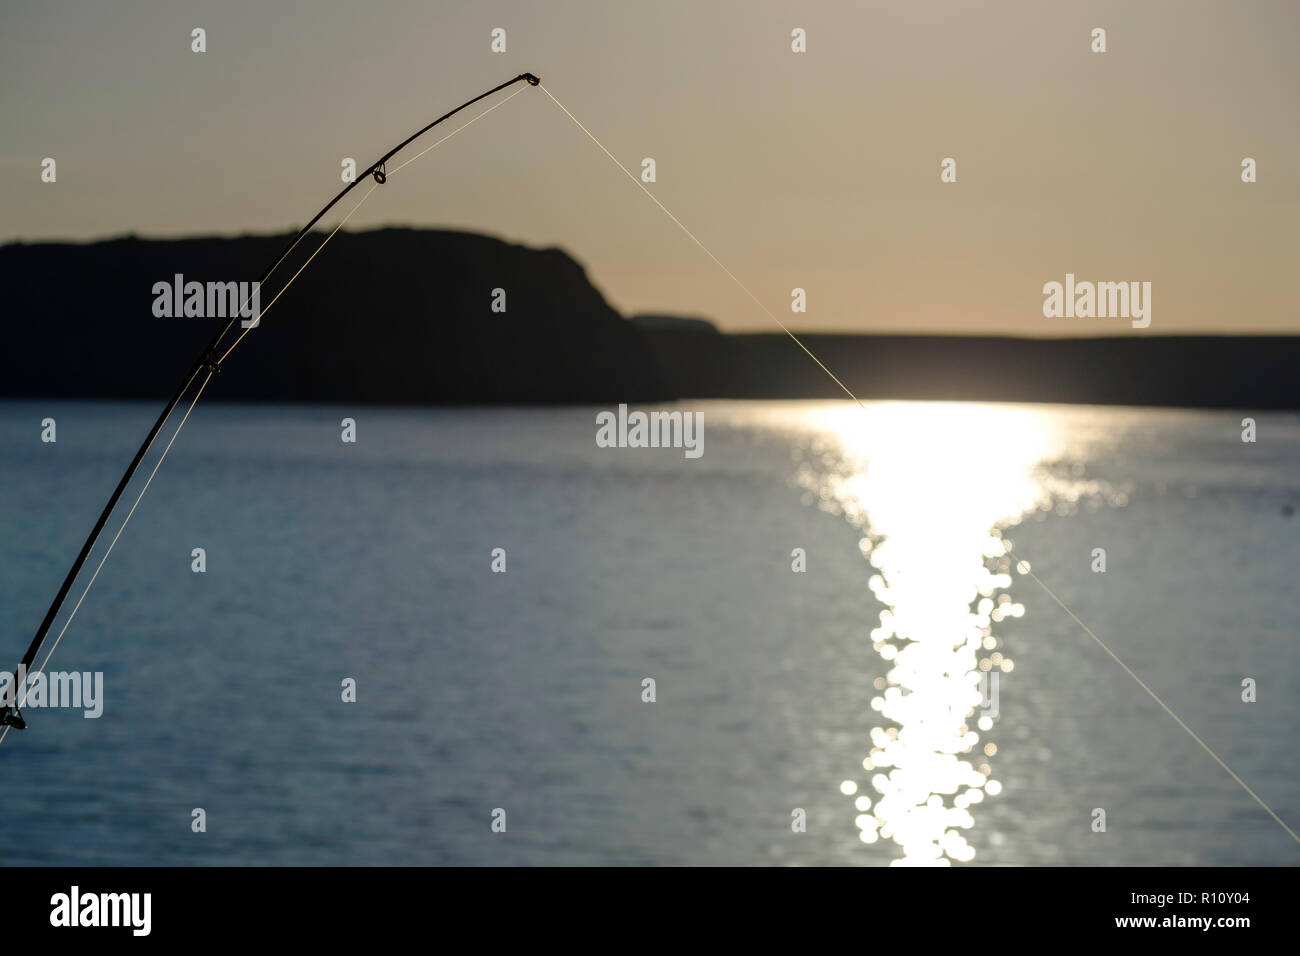 BENT SEA FISHING ROD WITH A  TIGHT LINE Stock Photo